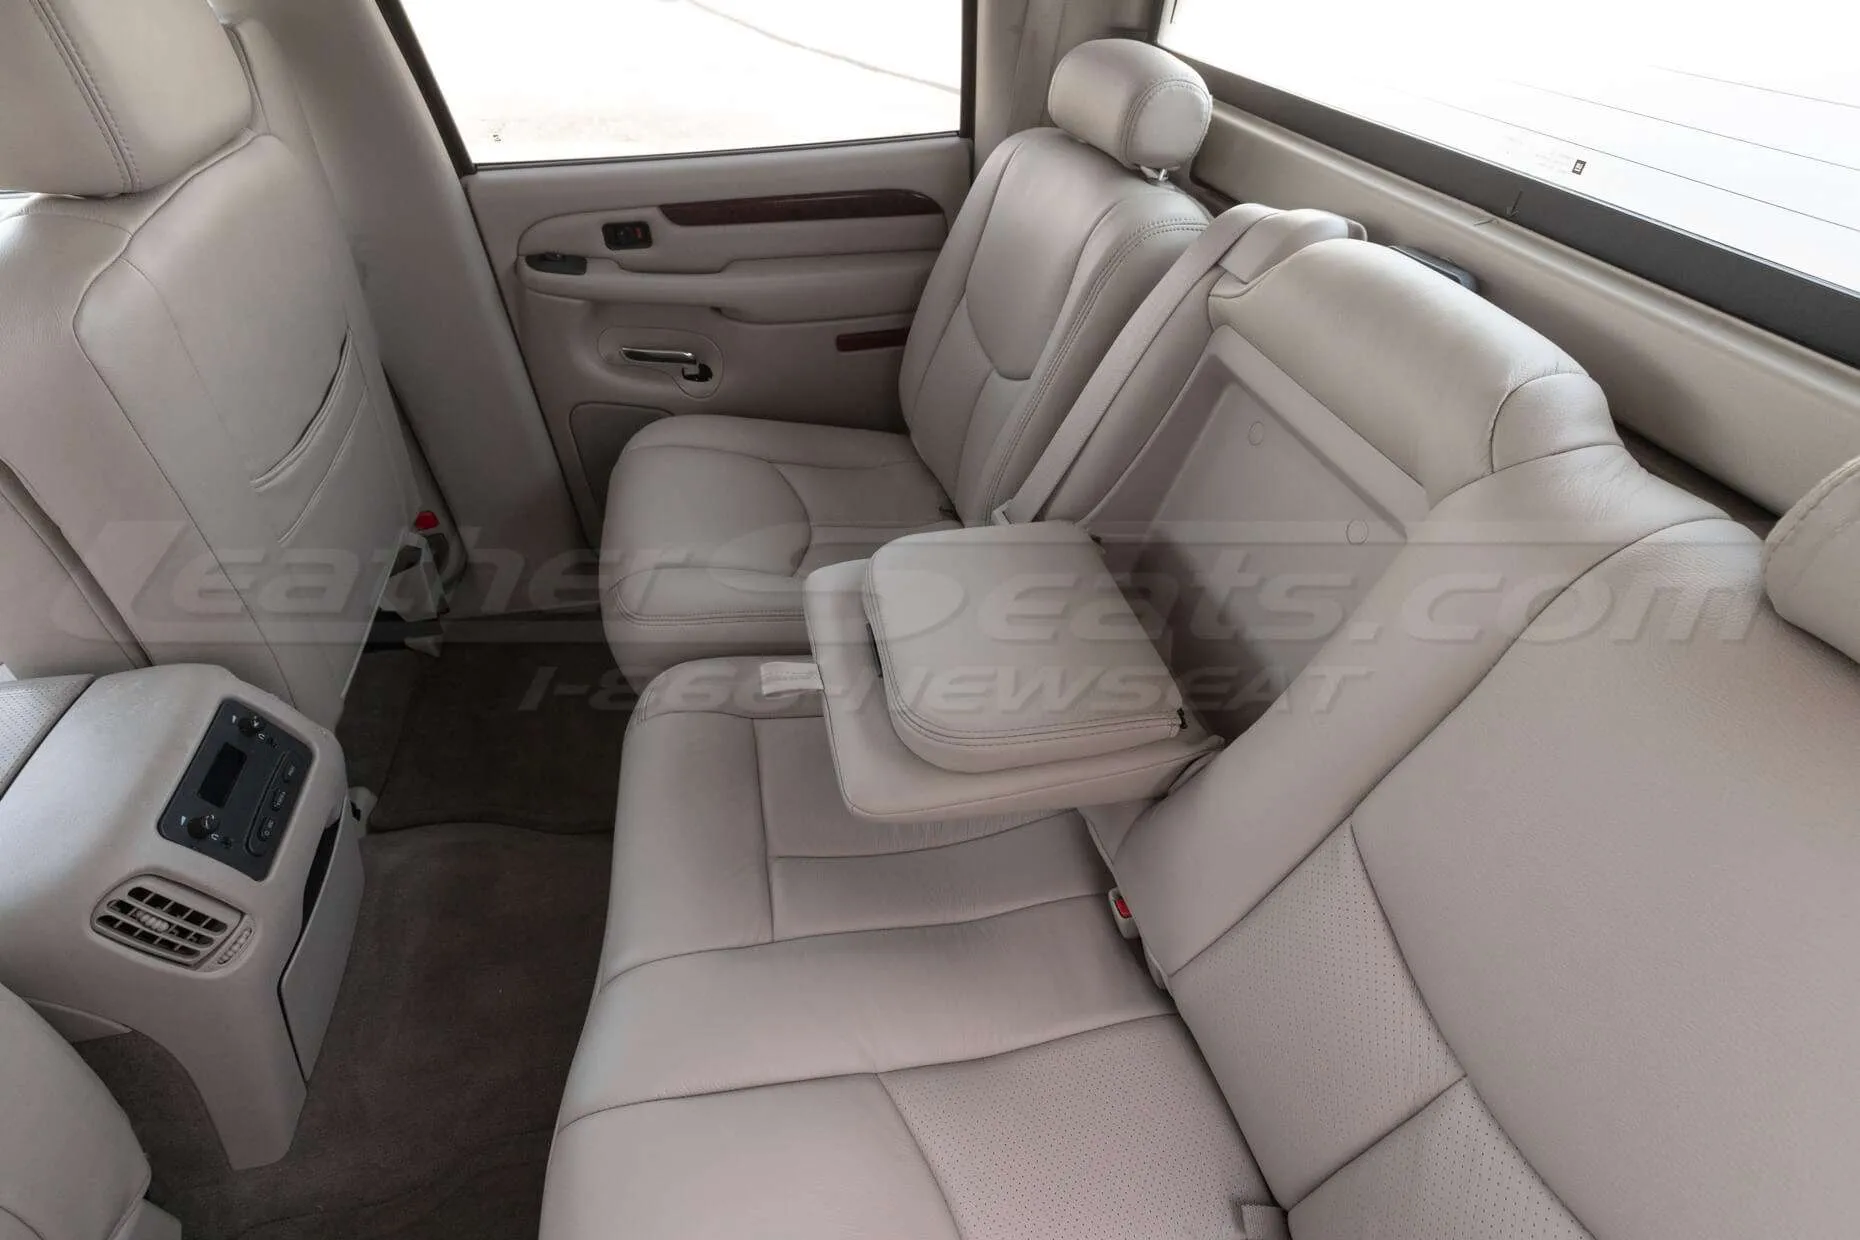 Cadillac Escalade EXT Leather Seats - Canvas - Rear seat upholstery with armrest